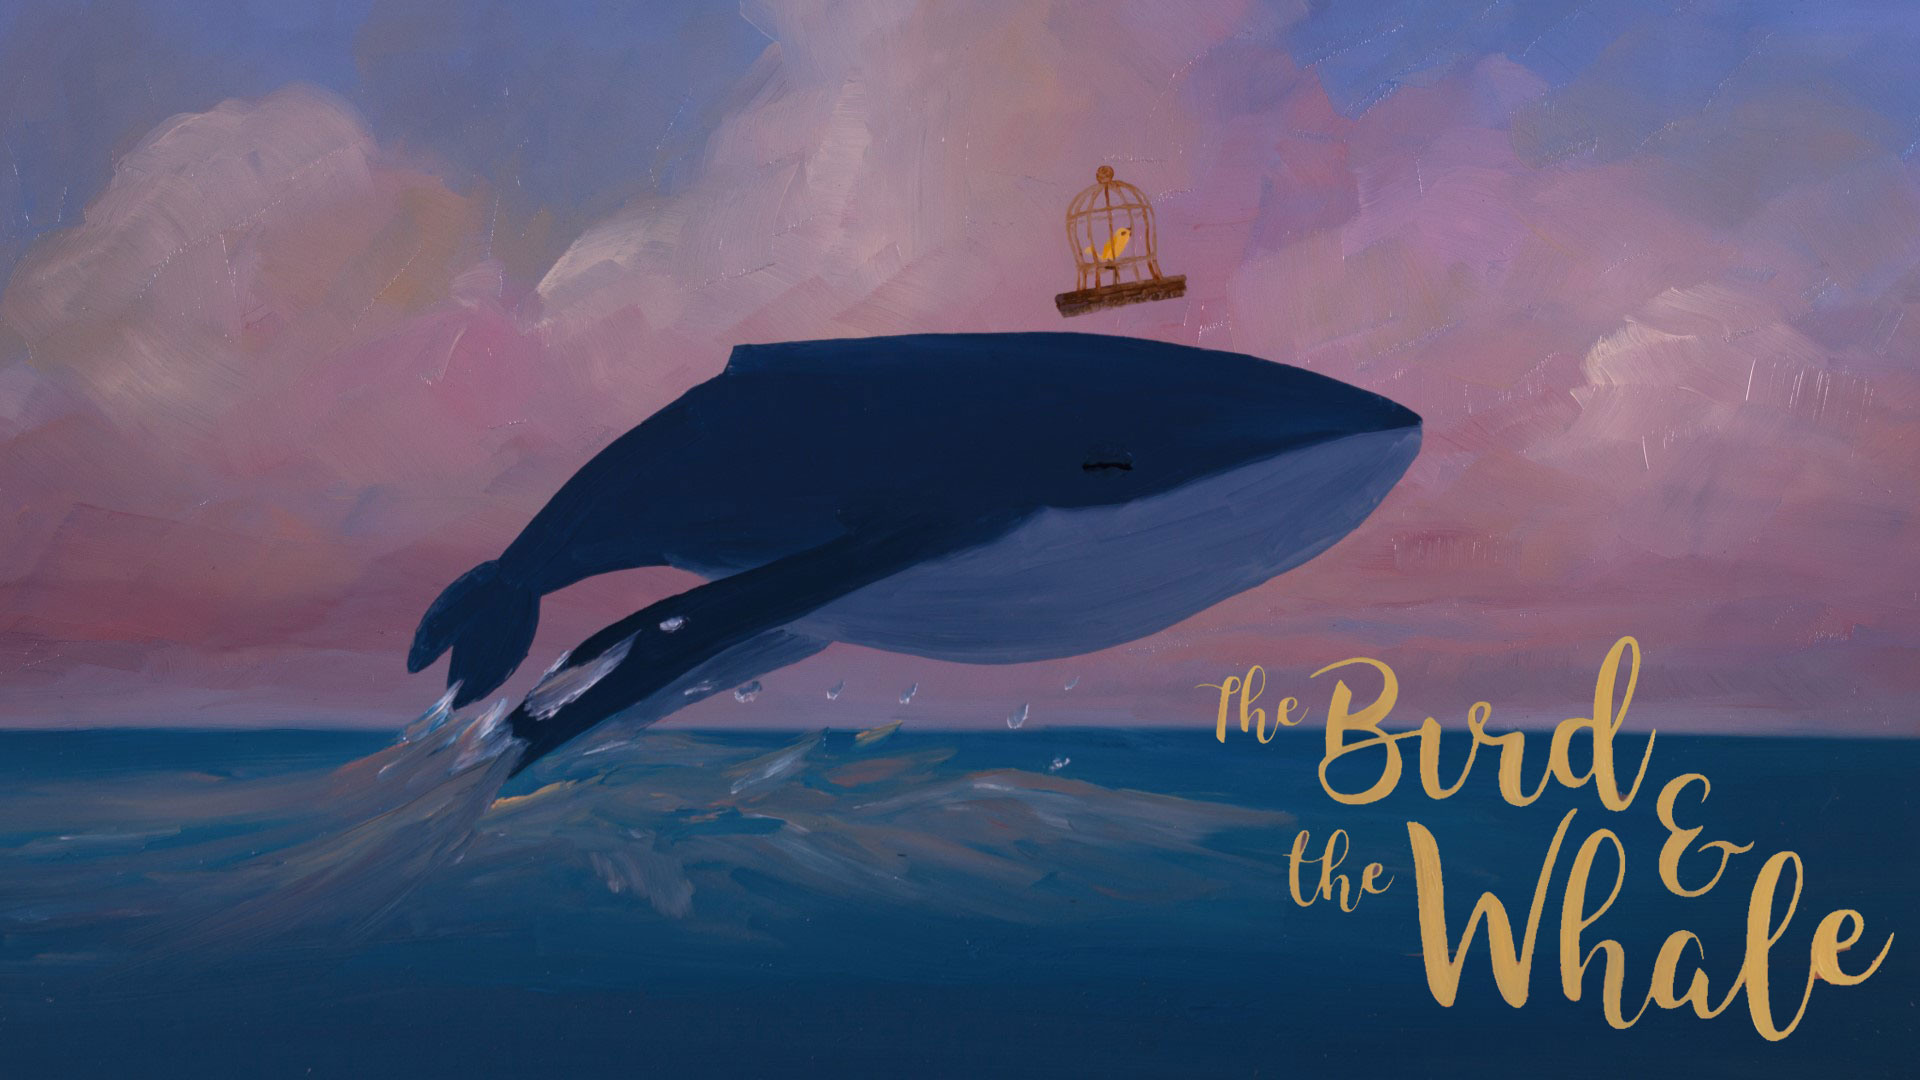 THE BIRD AND THE WHALE